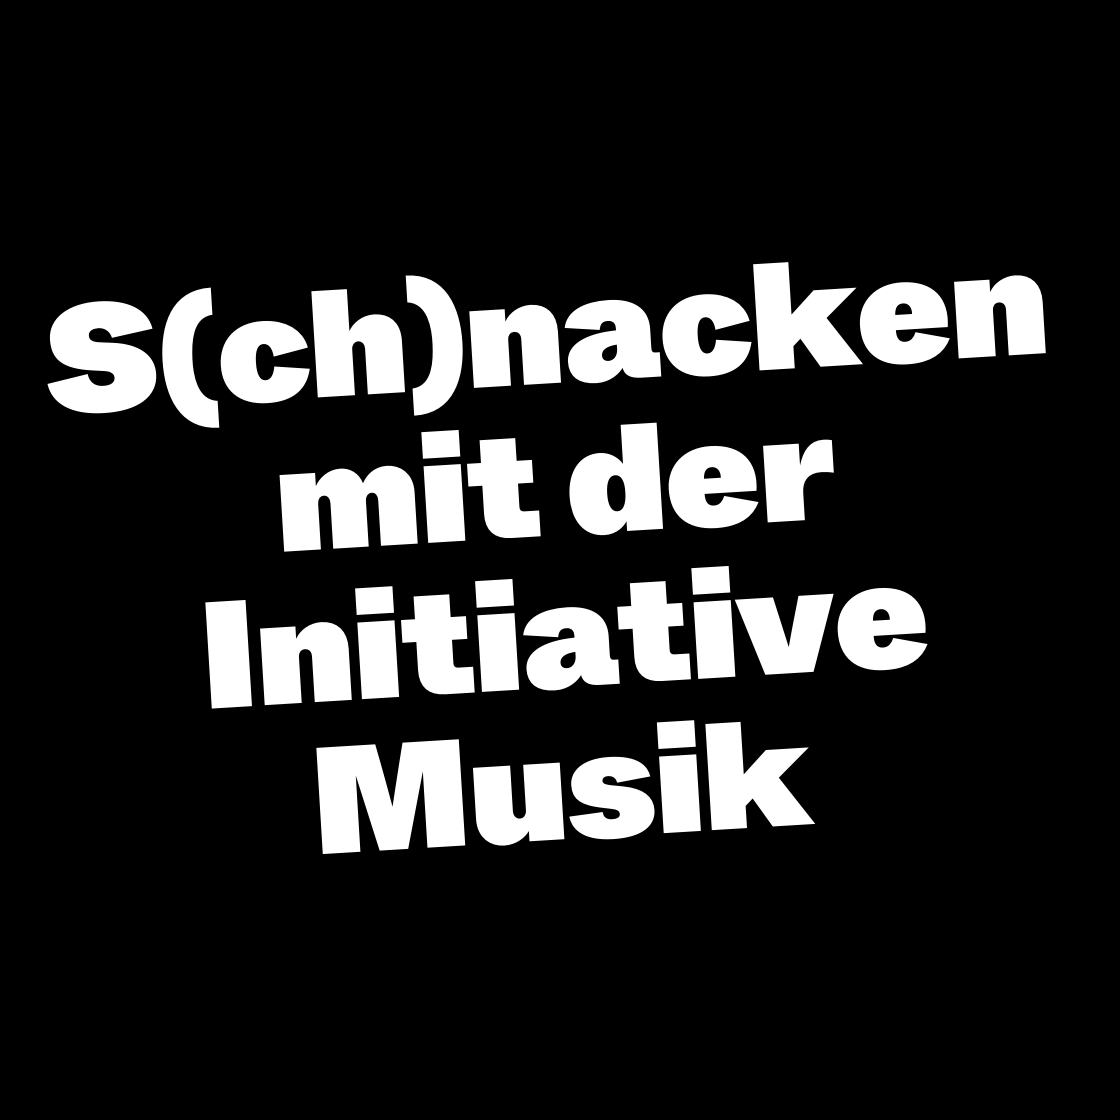 S(ch)nacken with the Initiative Musik